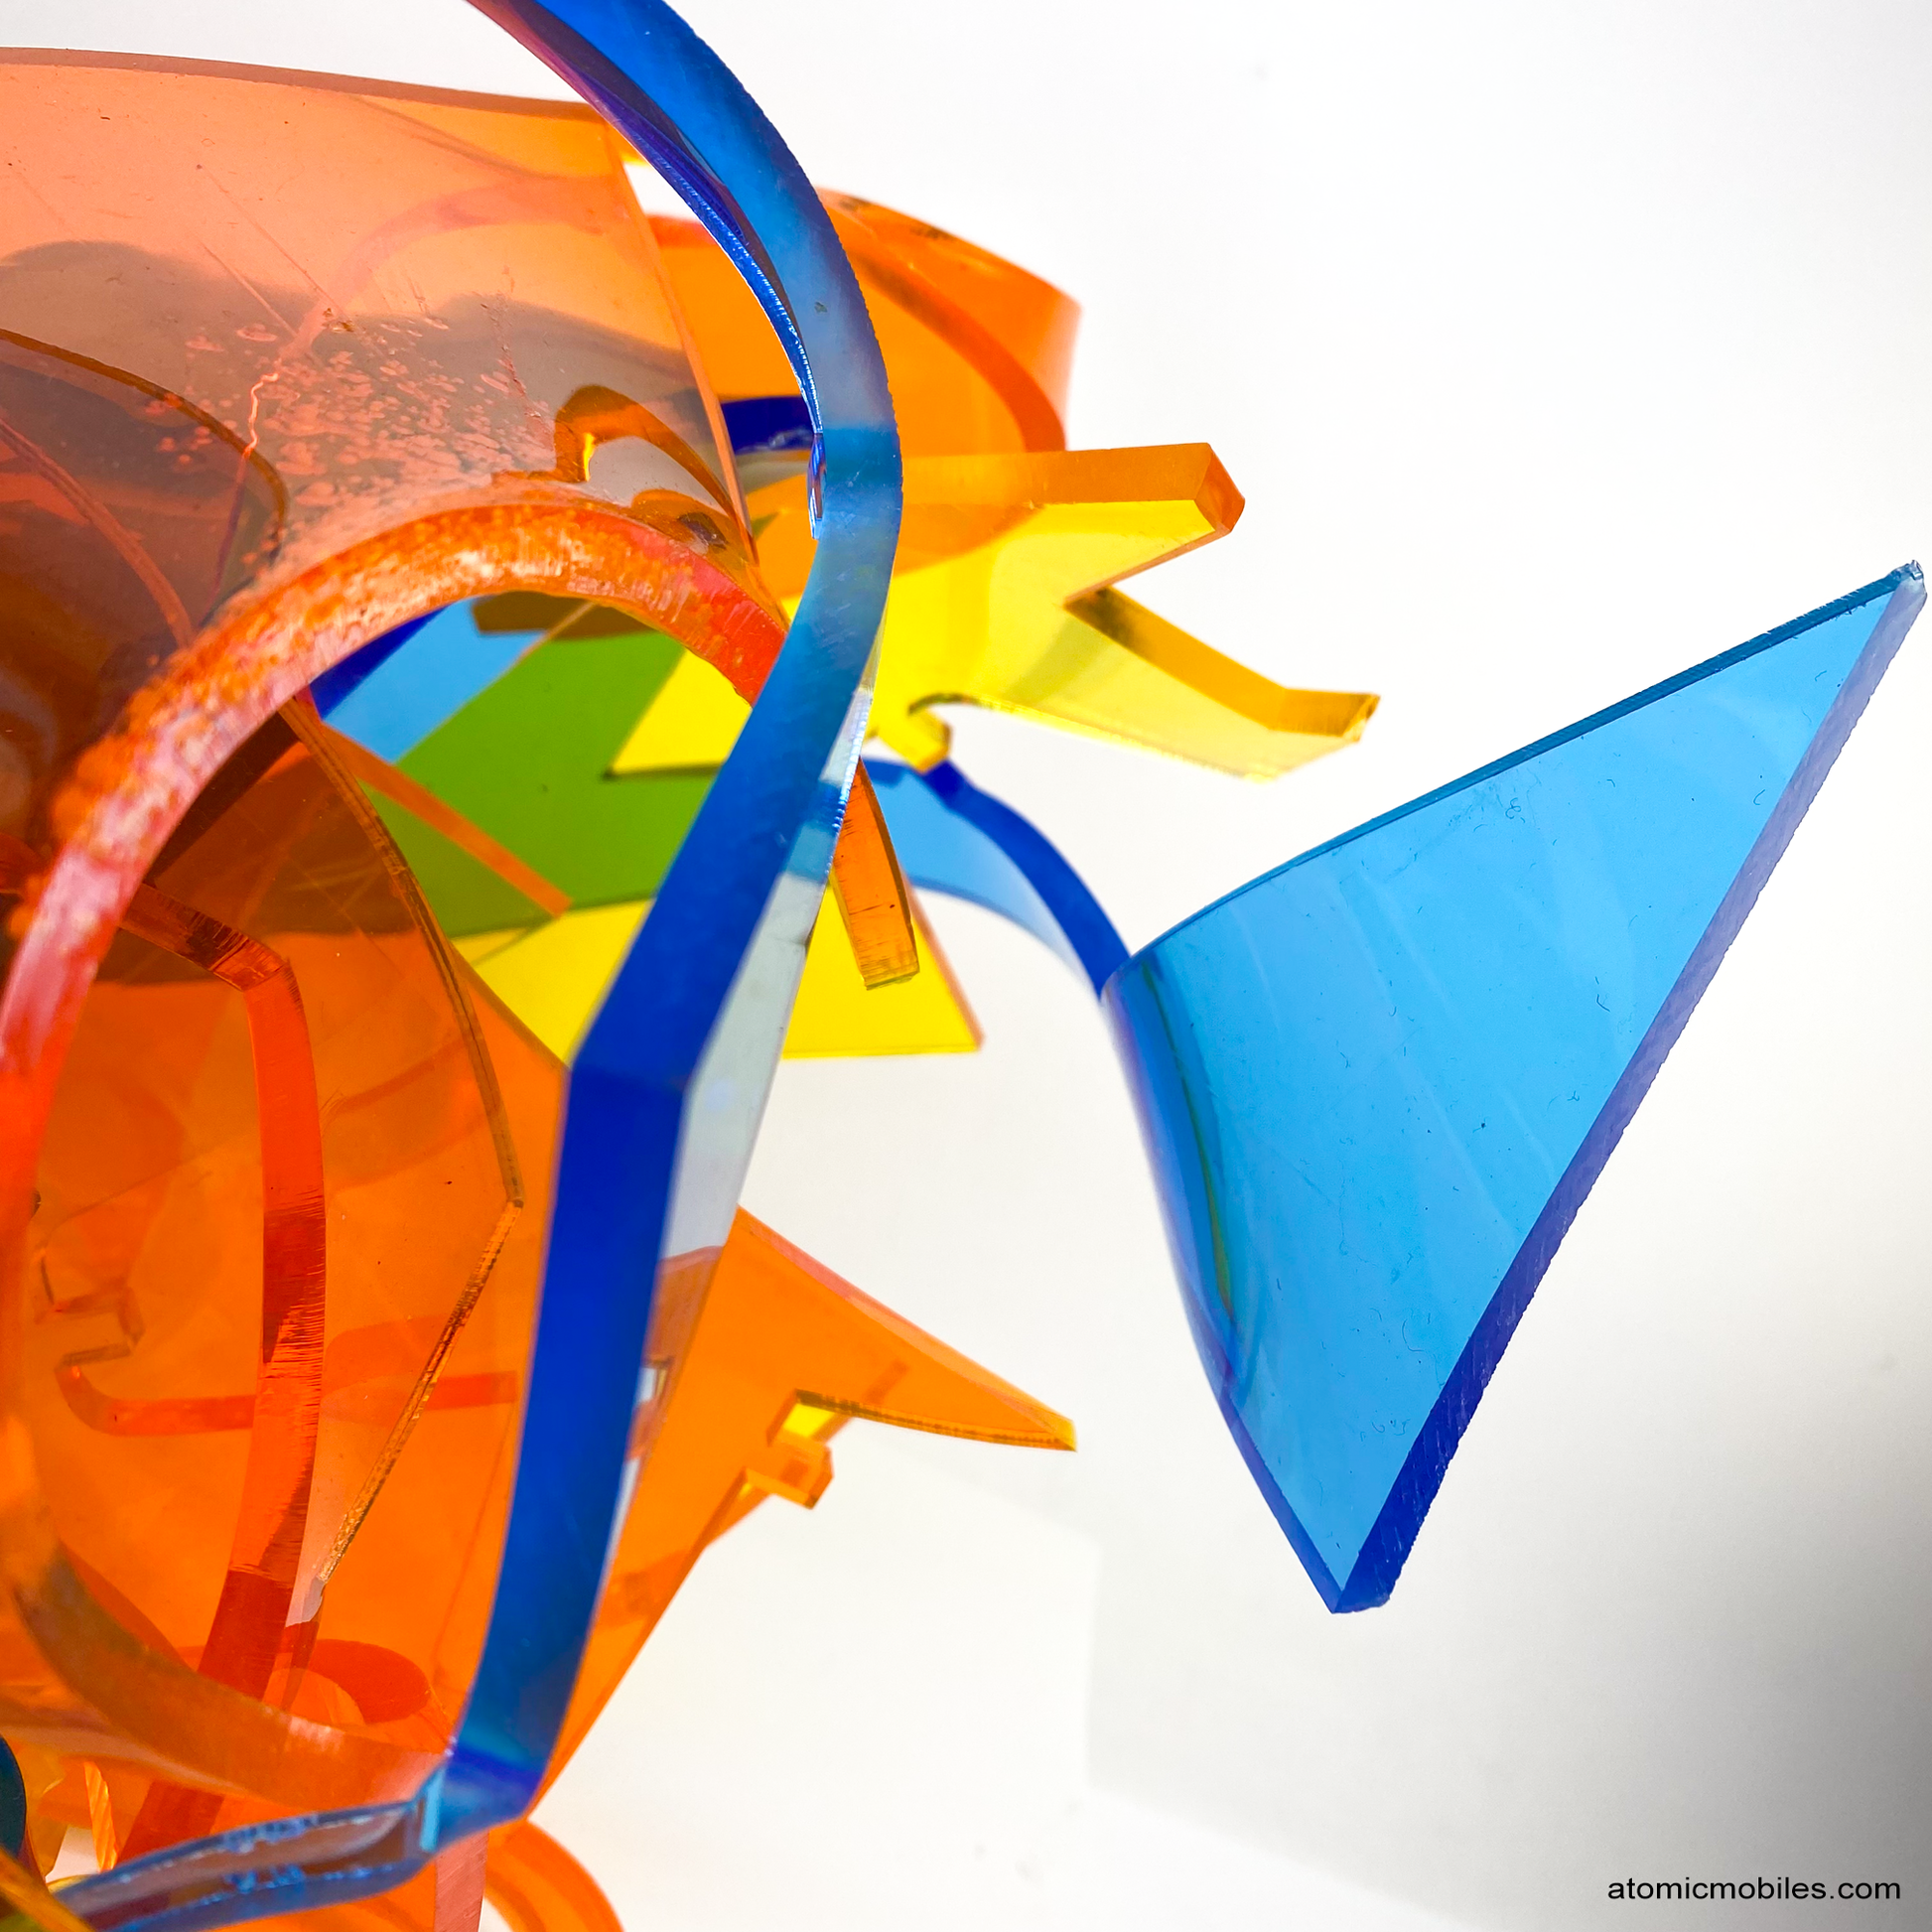 Closeup of Euphoria - mesmerizing Colorful abstract plexiglass acrylic abstract art sculpture in tranparent orange, yellow, blue - one of a kind modern art by AtomicMobiles.com